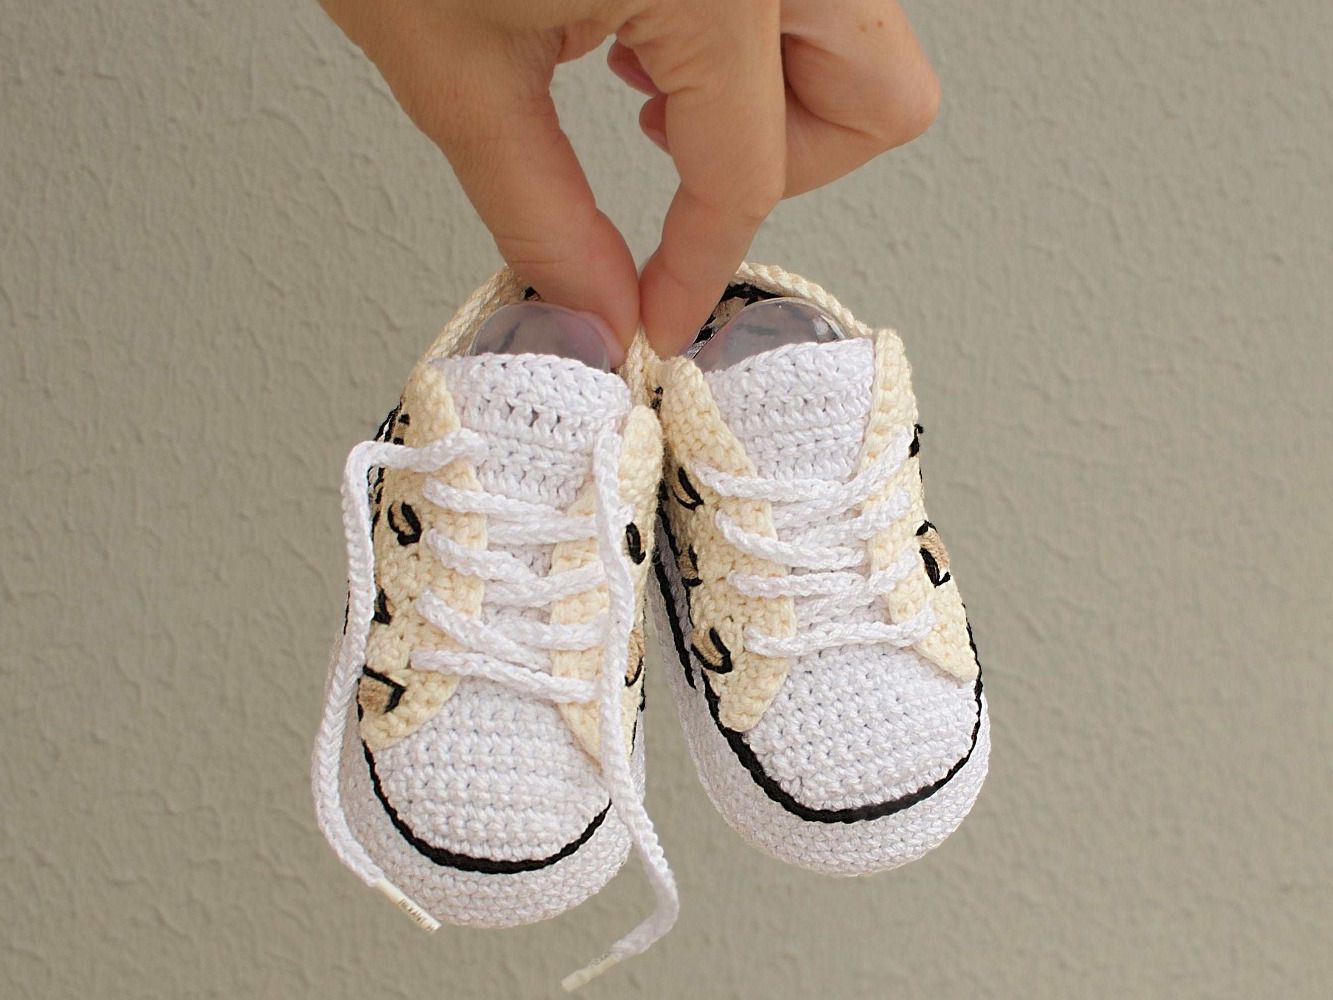 Converse all stars baby shoes crochet (english subtitles) 1/2 